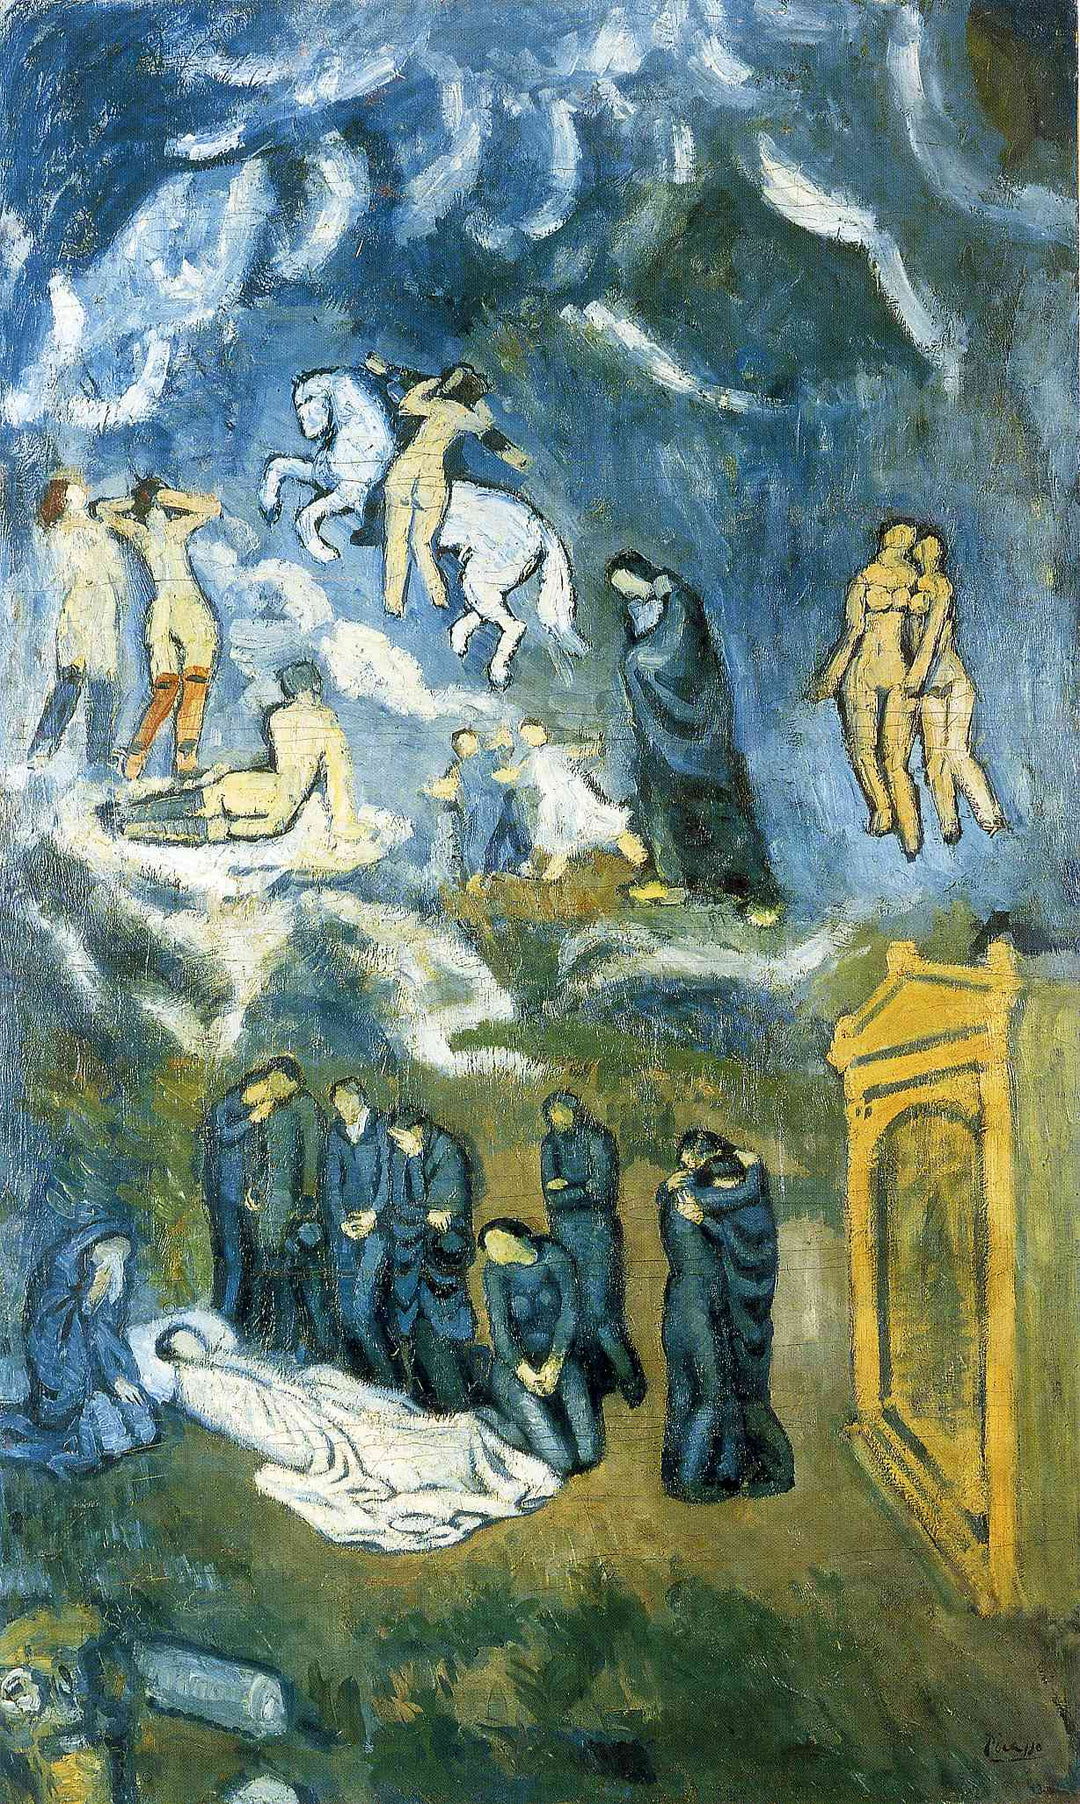 Evocation. The Burial of Casagemas by Pablo Picasso. Picasso artworks, Picasso wall art, Picasso canvas art, Picasso reproduction for sale, Picasso oil painting on canvas, Blue Surf Art